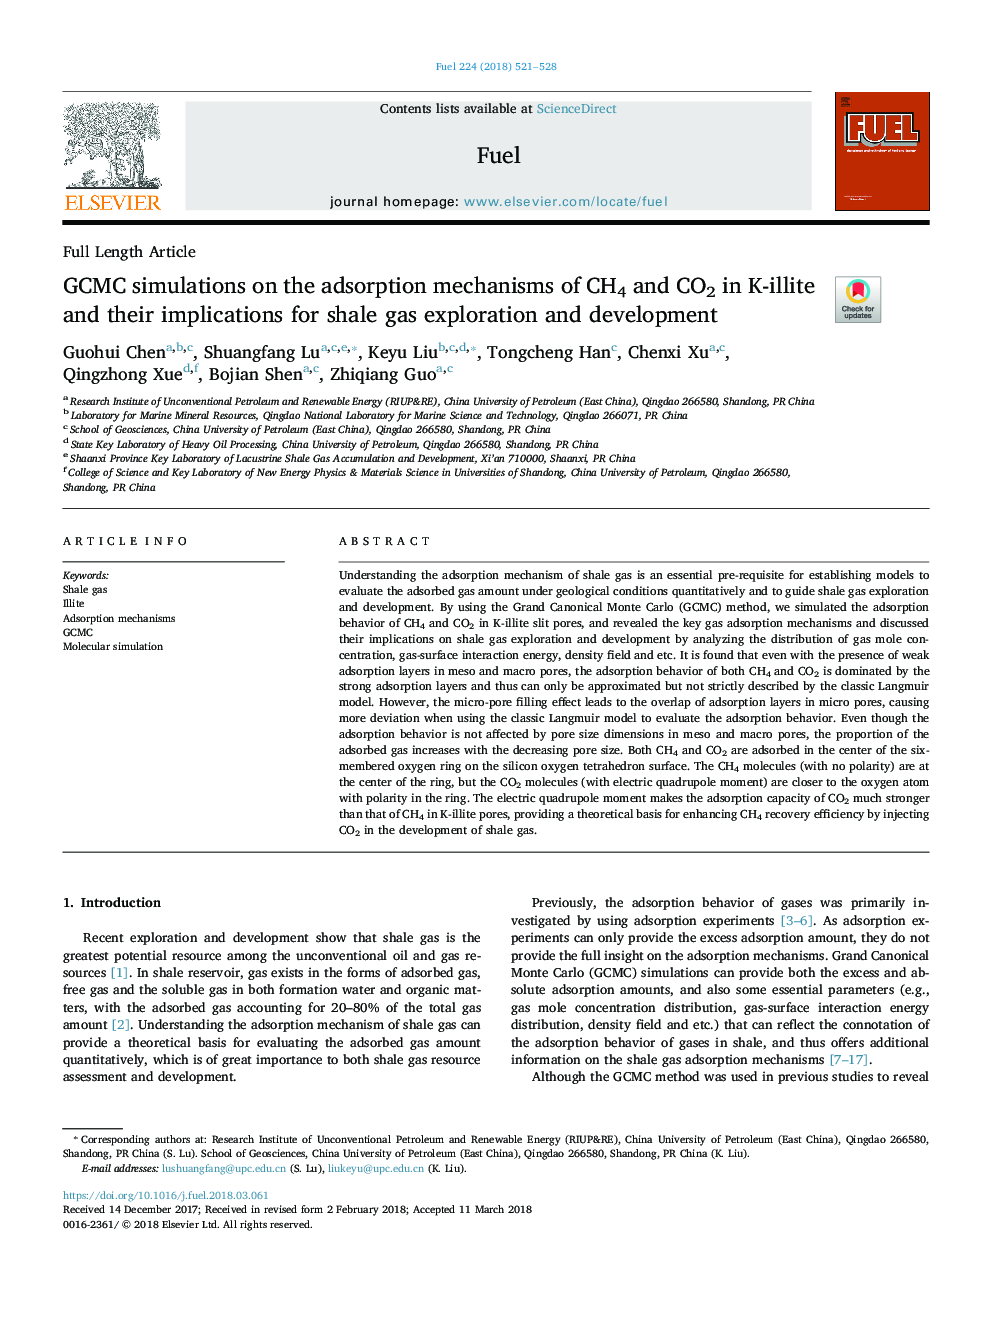 GCMC simulations on the adsorption mechanisms of CH4 and CO2 in K-illite and their implications for shale gas exploration and development